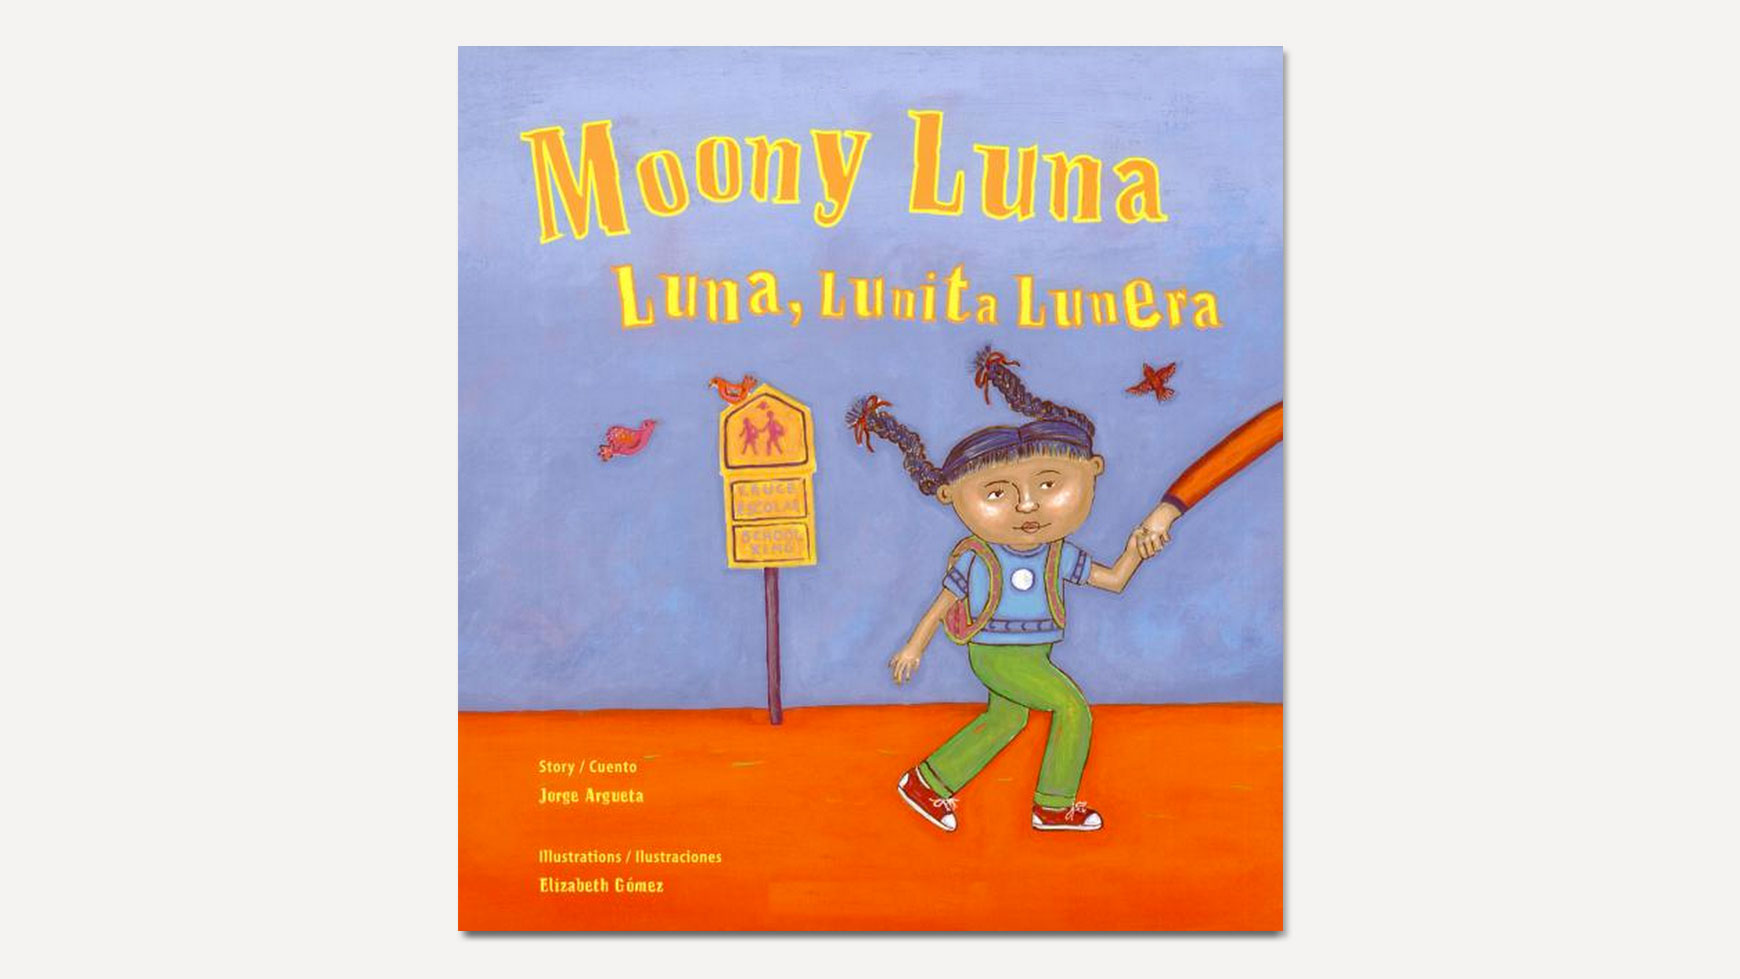 Play Date : Book 3 - Little Luna Series (Beginning Chapter Books, Funny  Books for Kids, Kids Book Series): A tiny funny story that subtly promotes  courage, friendship, inner strength, and self-esteem (